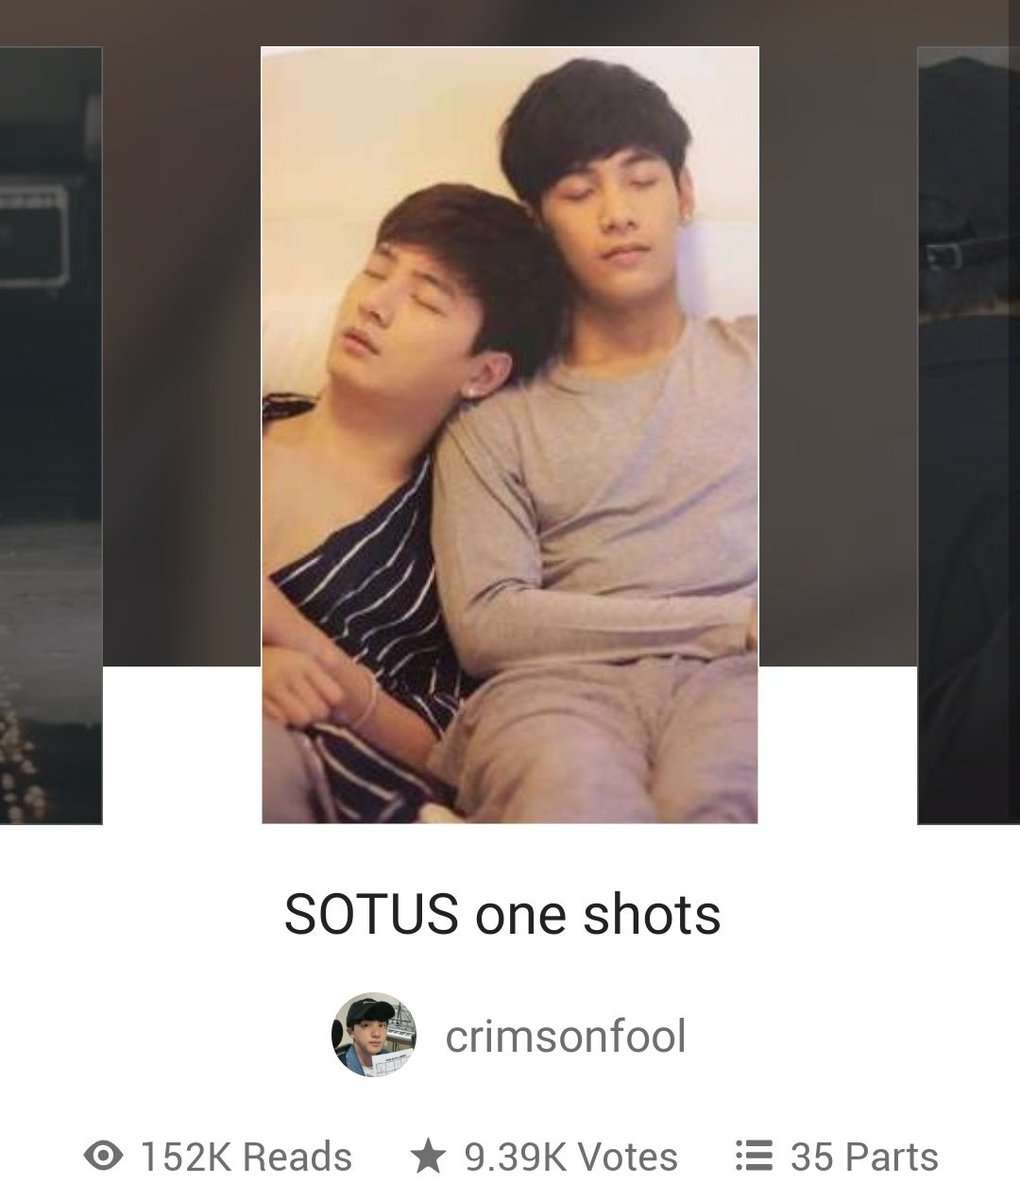  SOTUS one shots by crimsonfoolThis is a gem  I really loved rereading the one shots here LALO NA YUNG "A THOUSAND CRANES CAN NEVER HURT" POTAAAA link:  https://my.w.tt/F97A66cdS6 